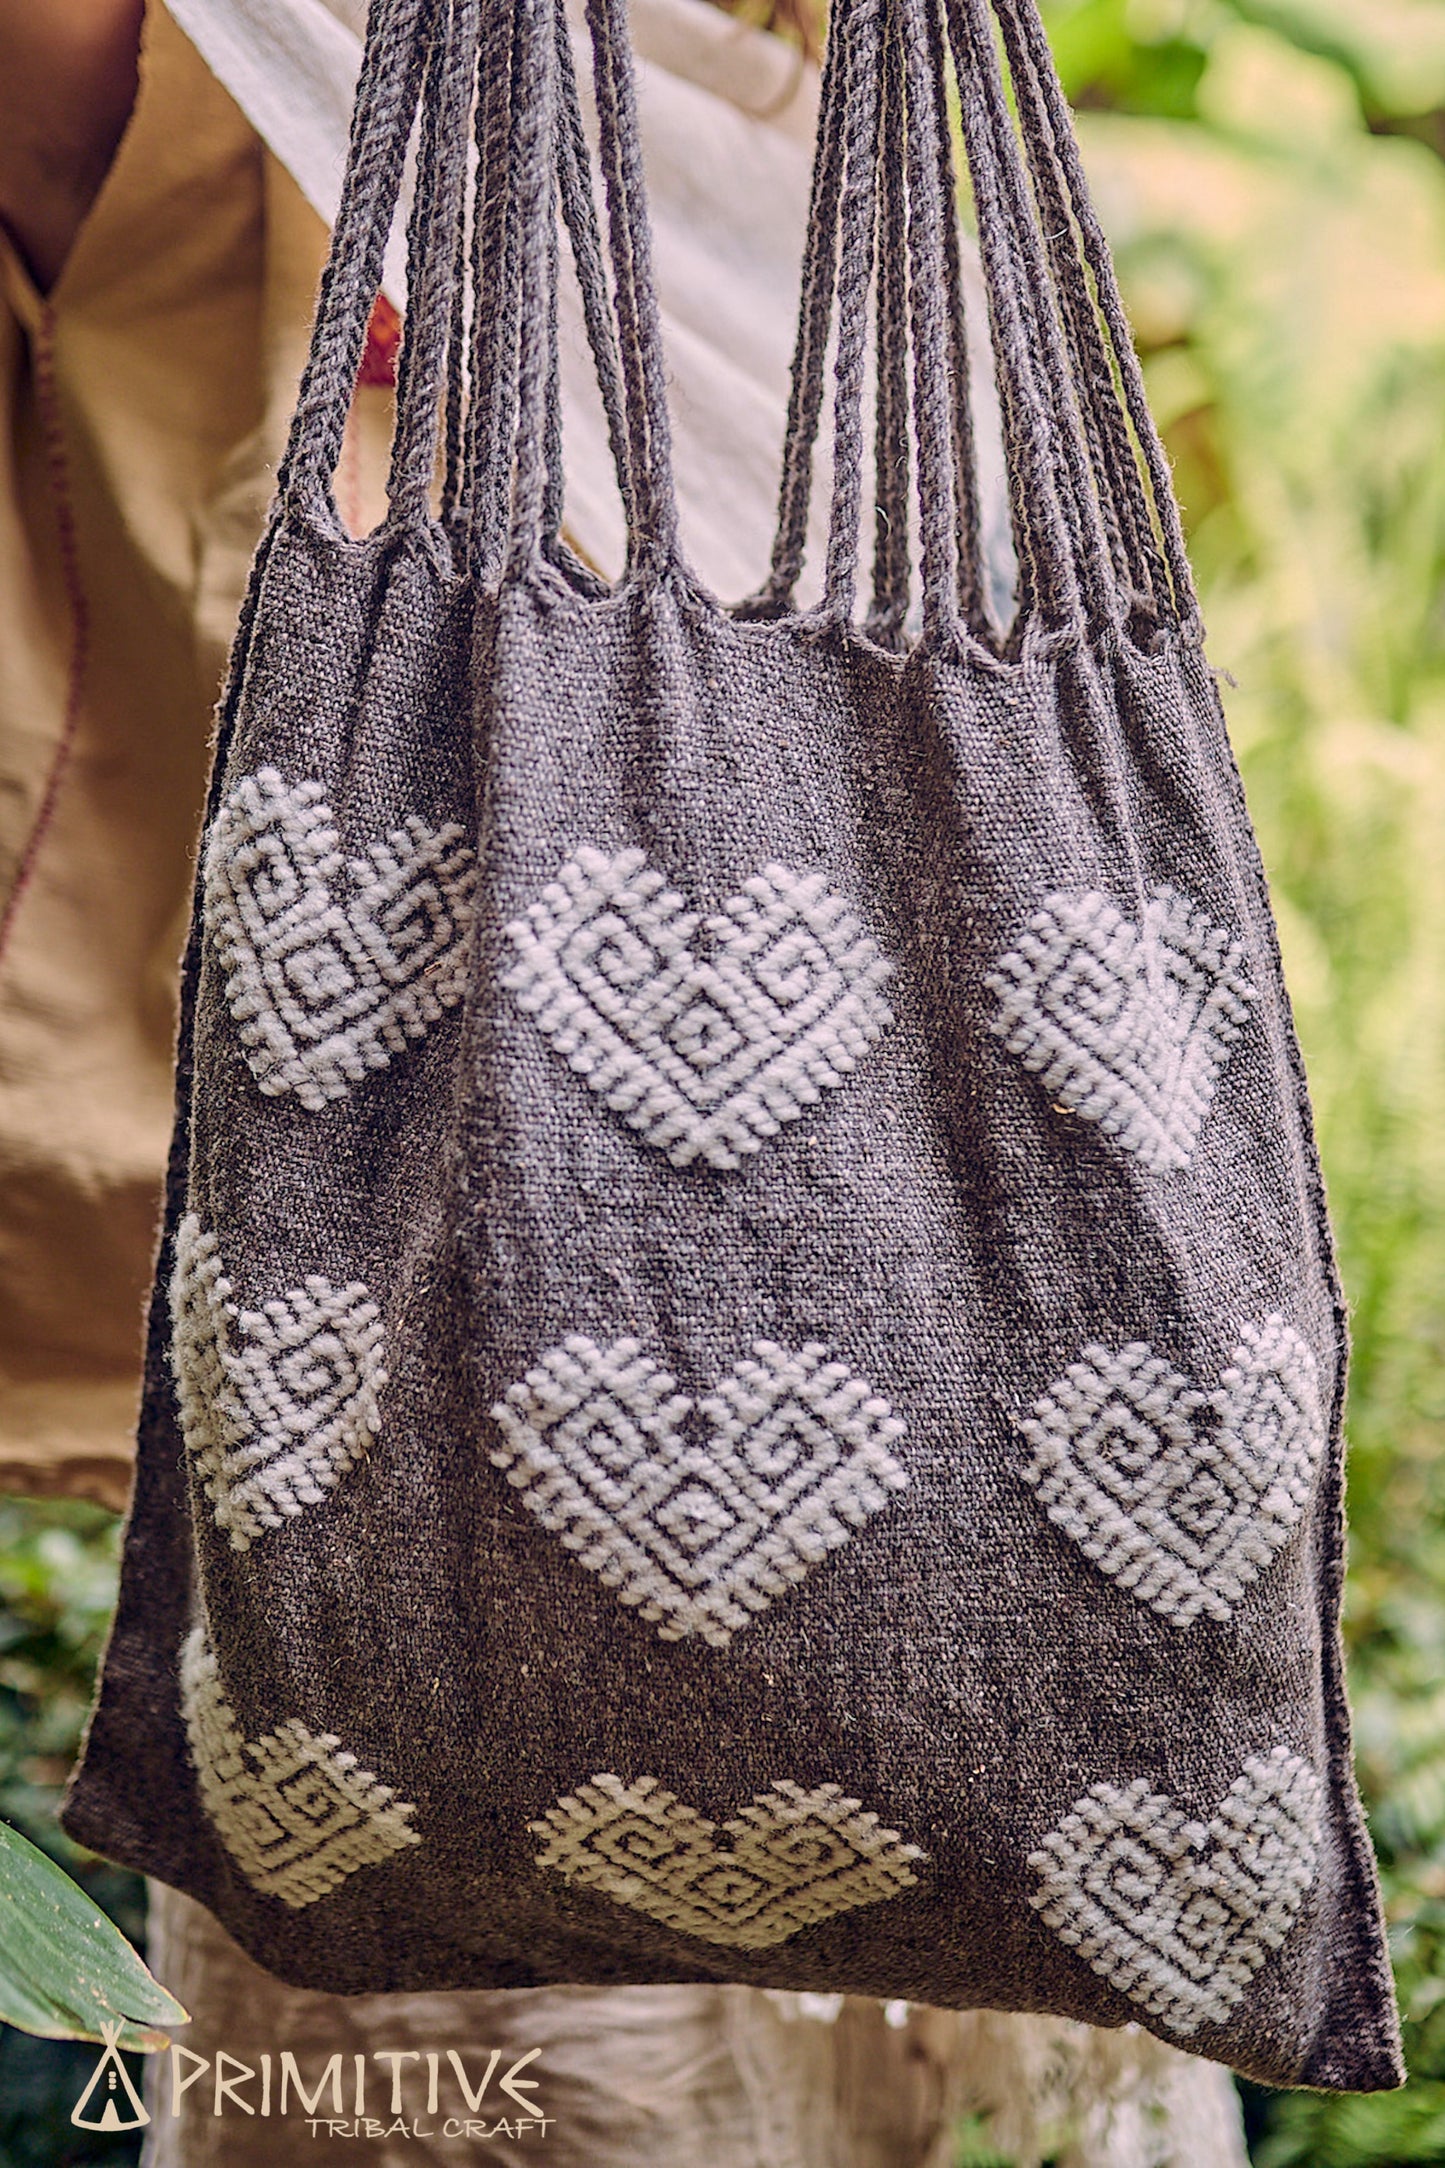 Traditional Backstrap Loom Natural Wool Bag ๑⋙ with Tribal Embroidery